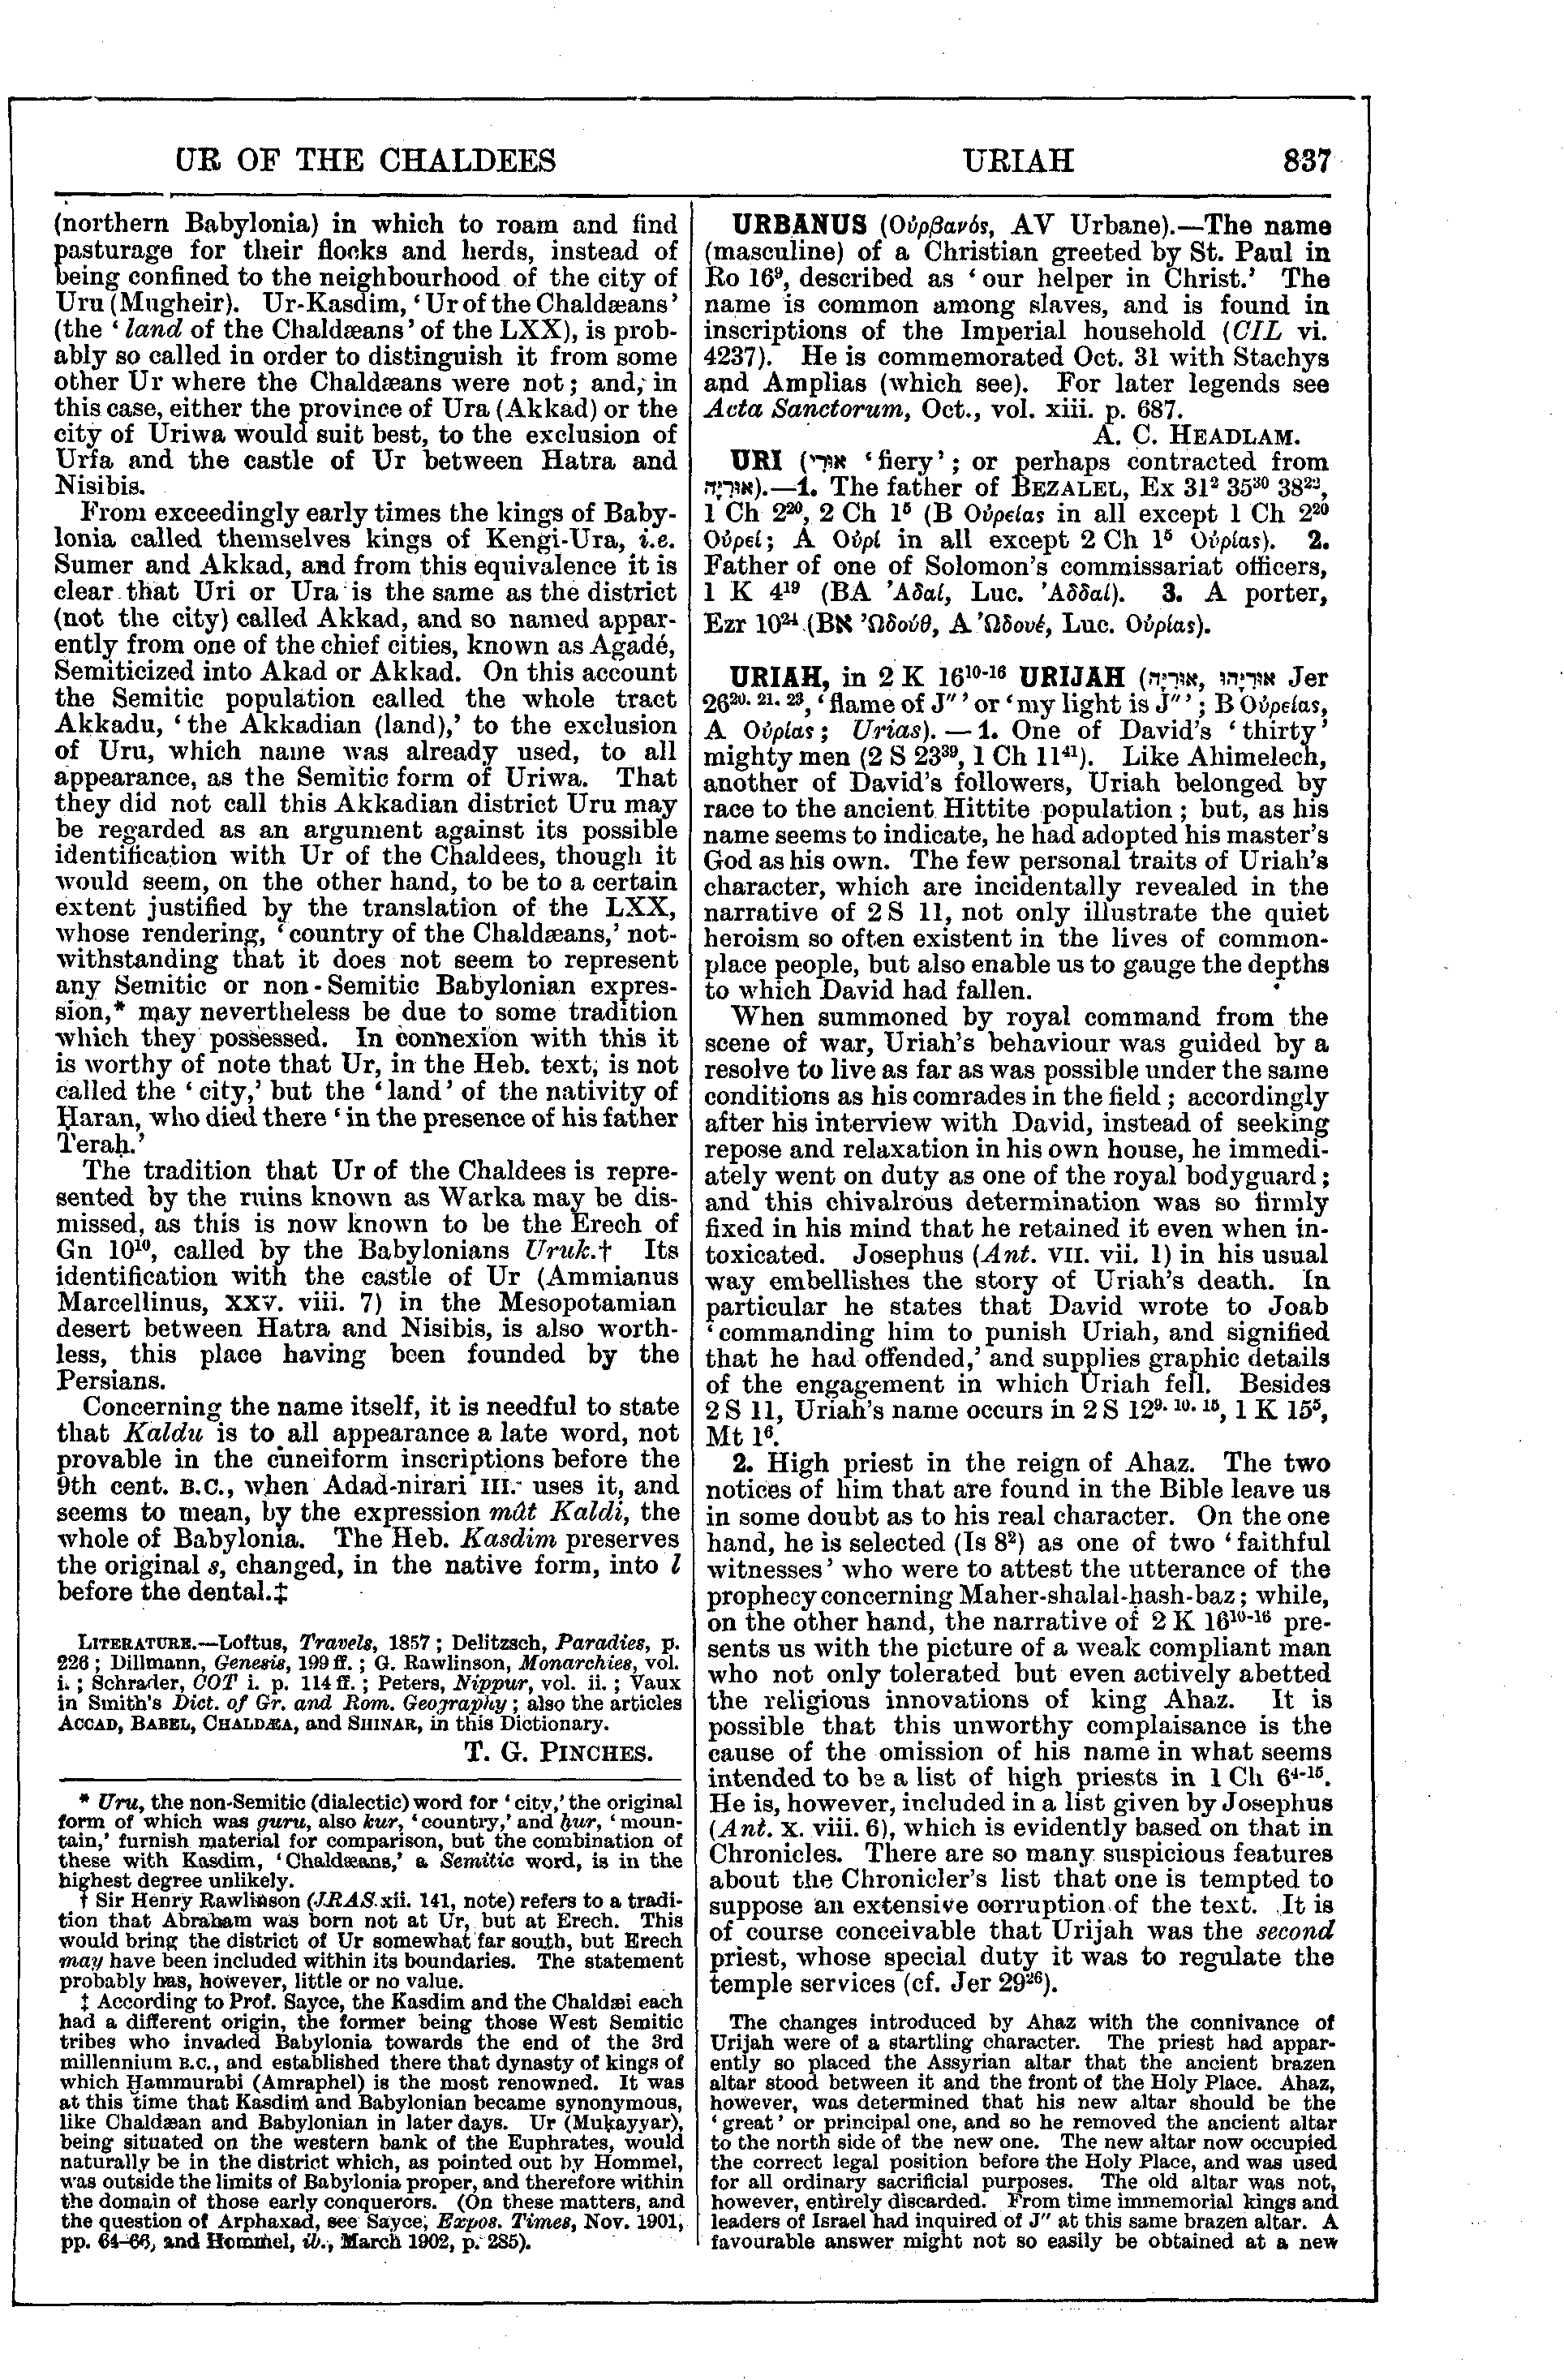 Image of page 837